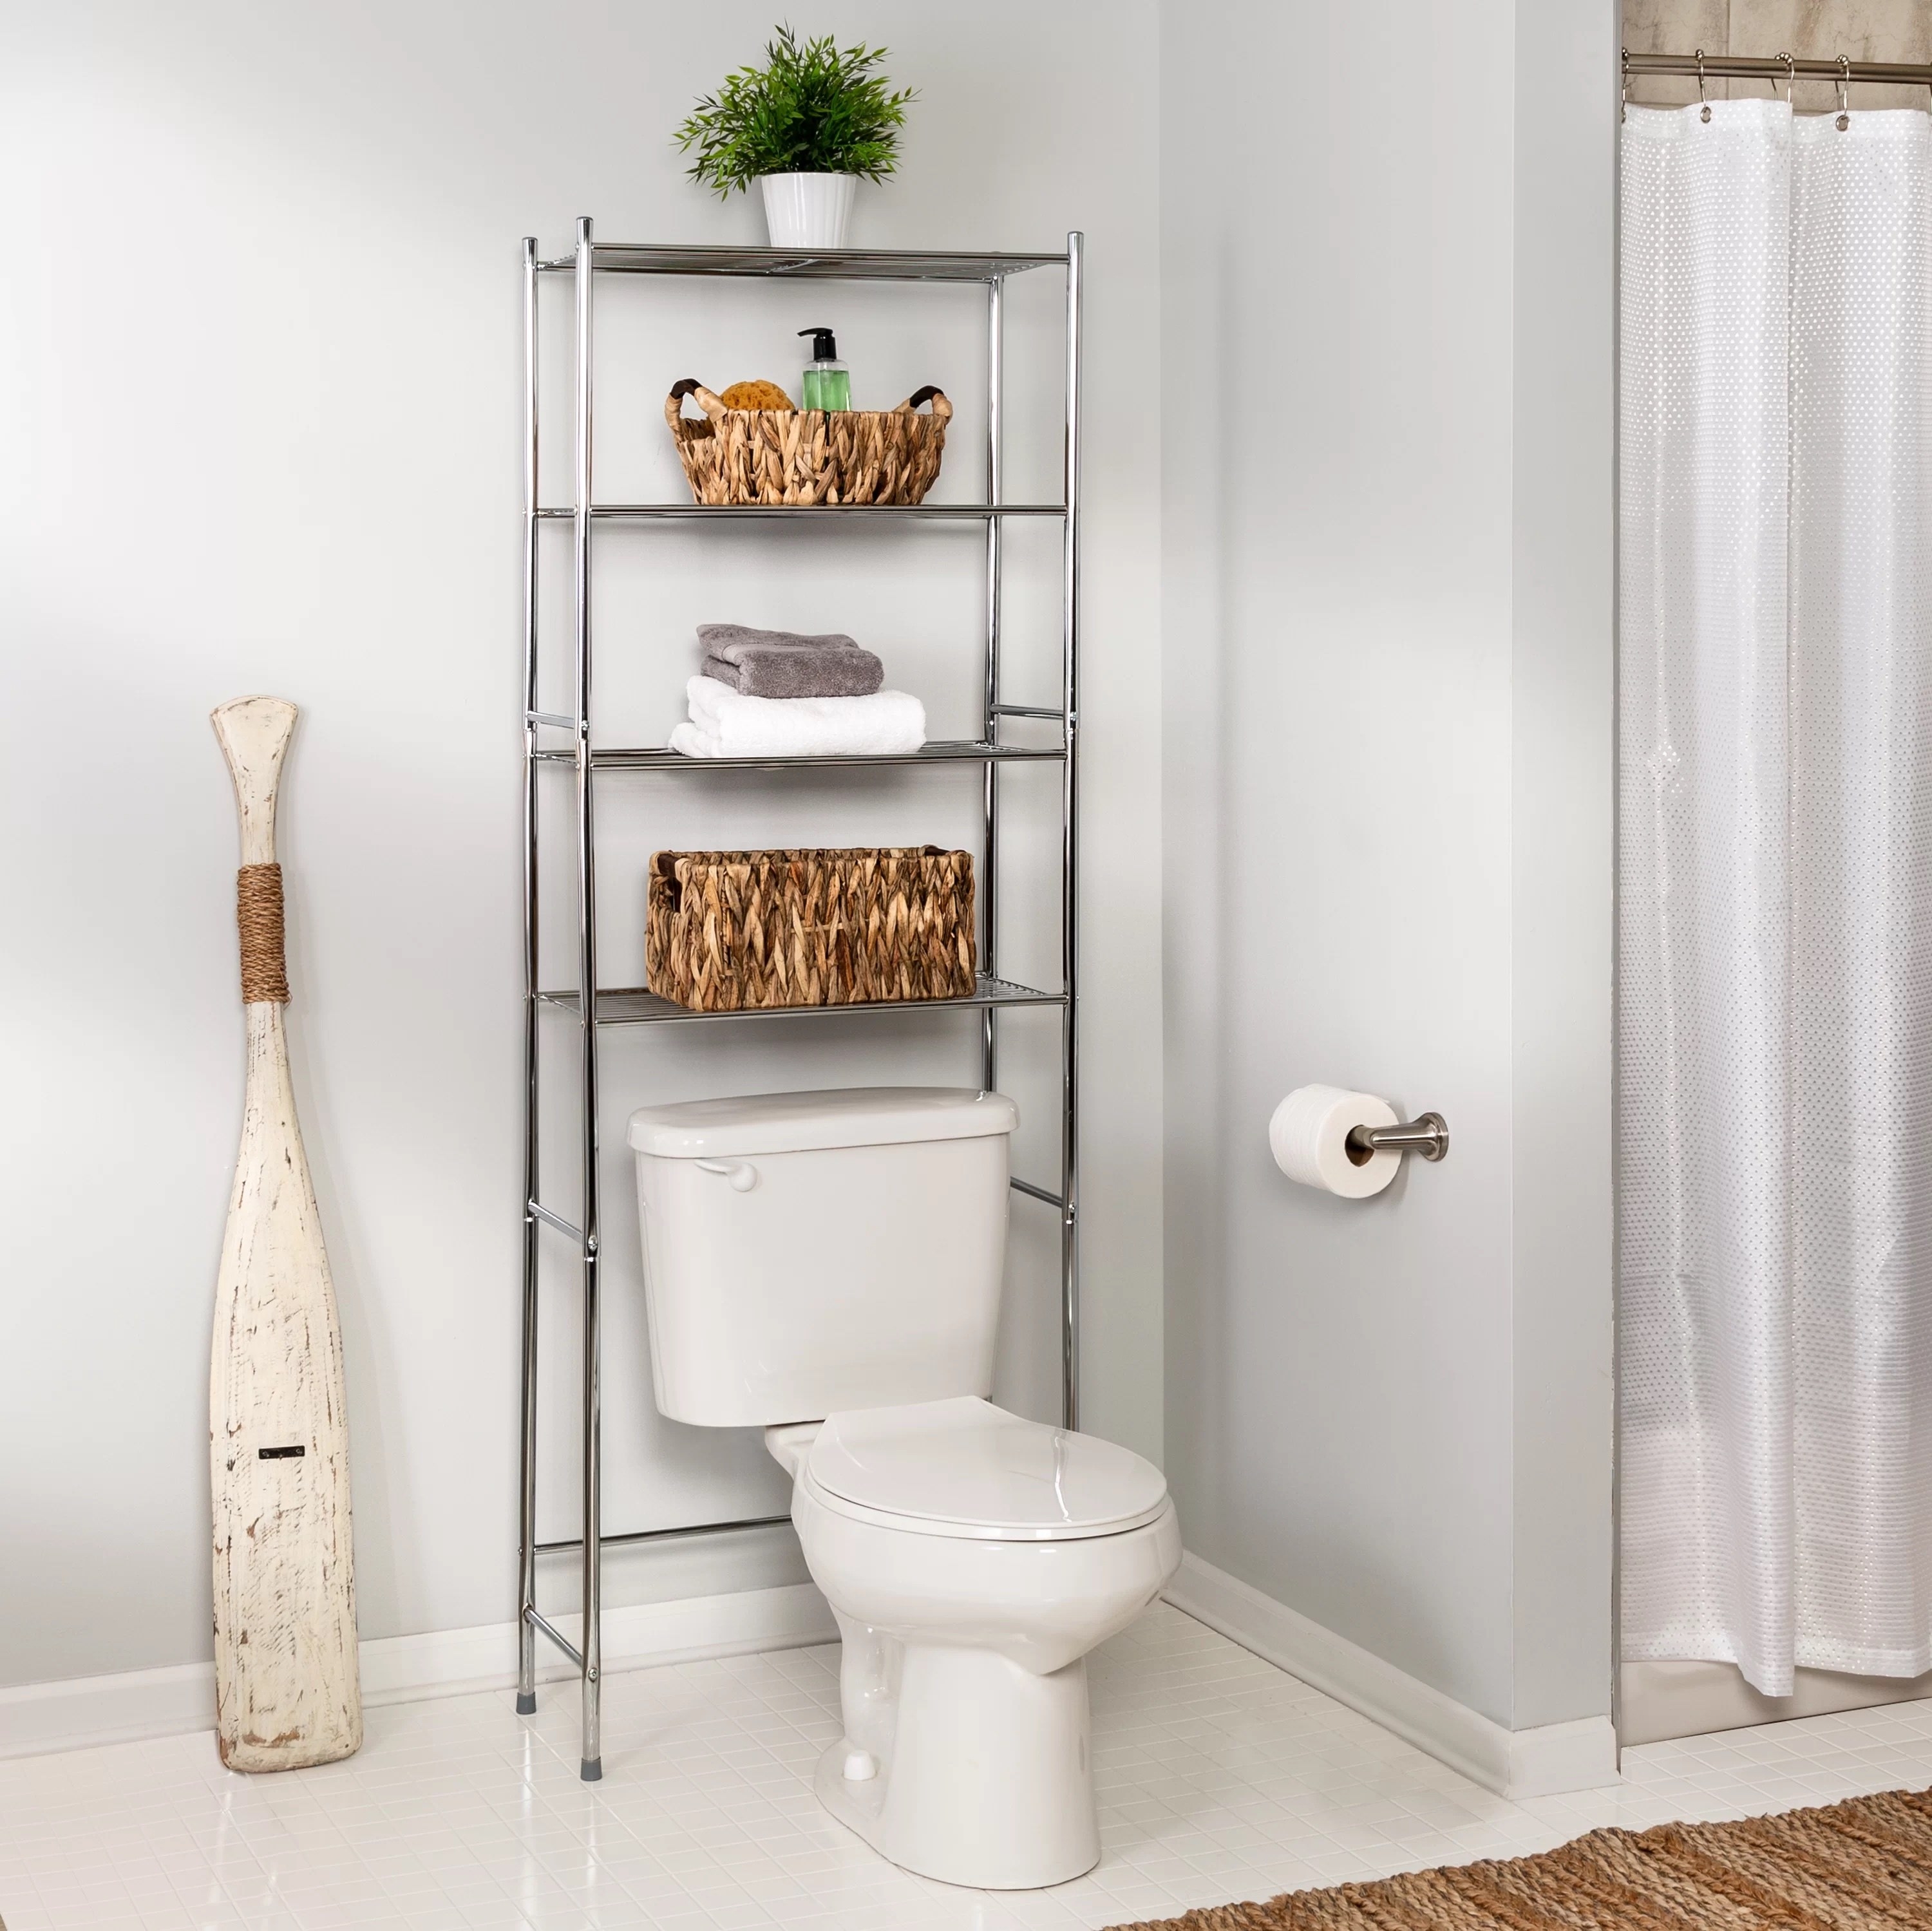 A simple silver over the toilet organizer